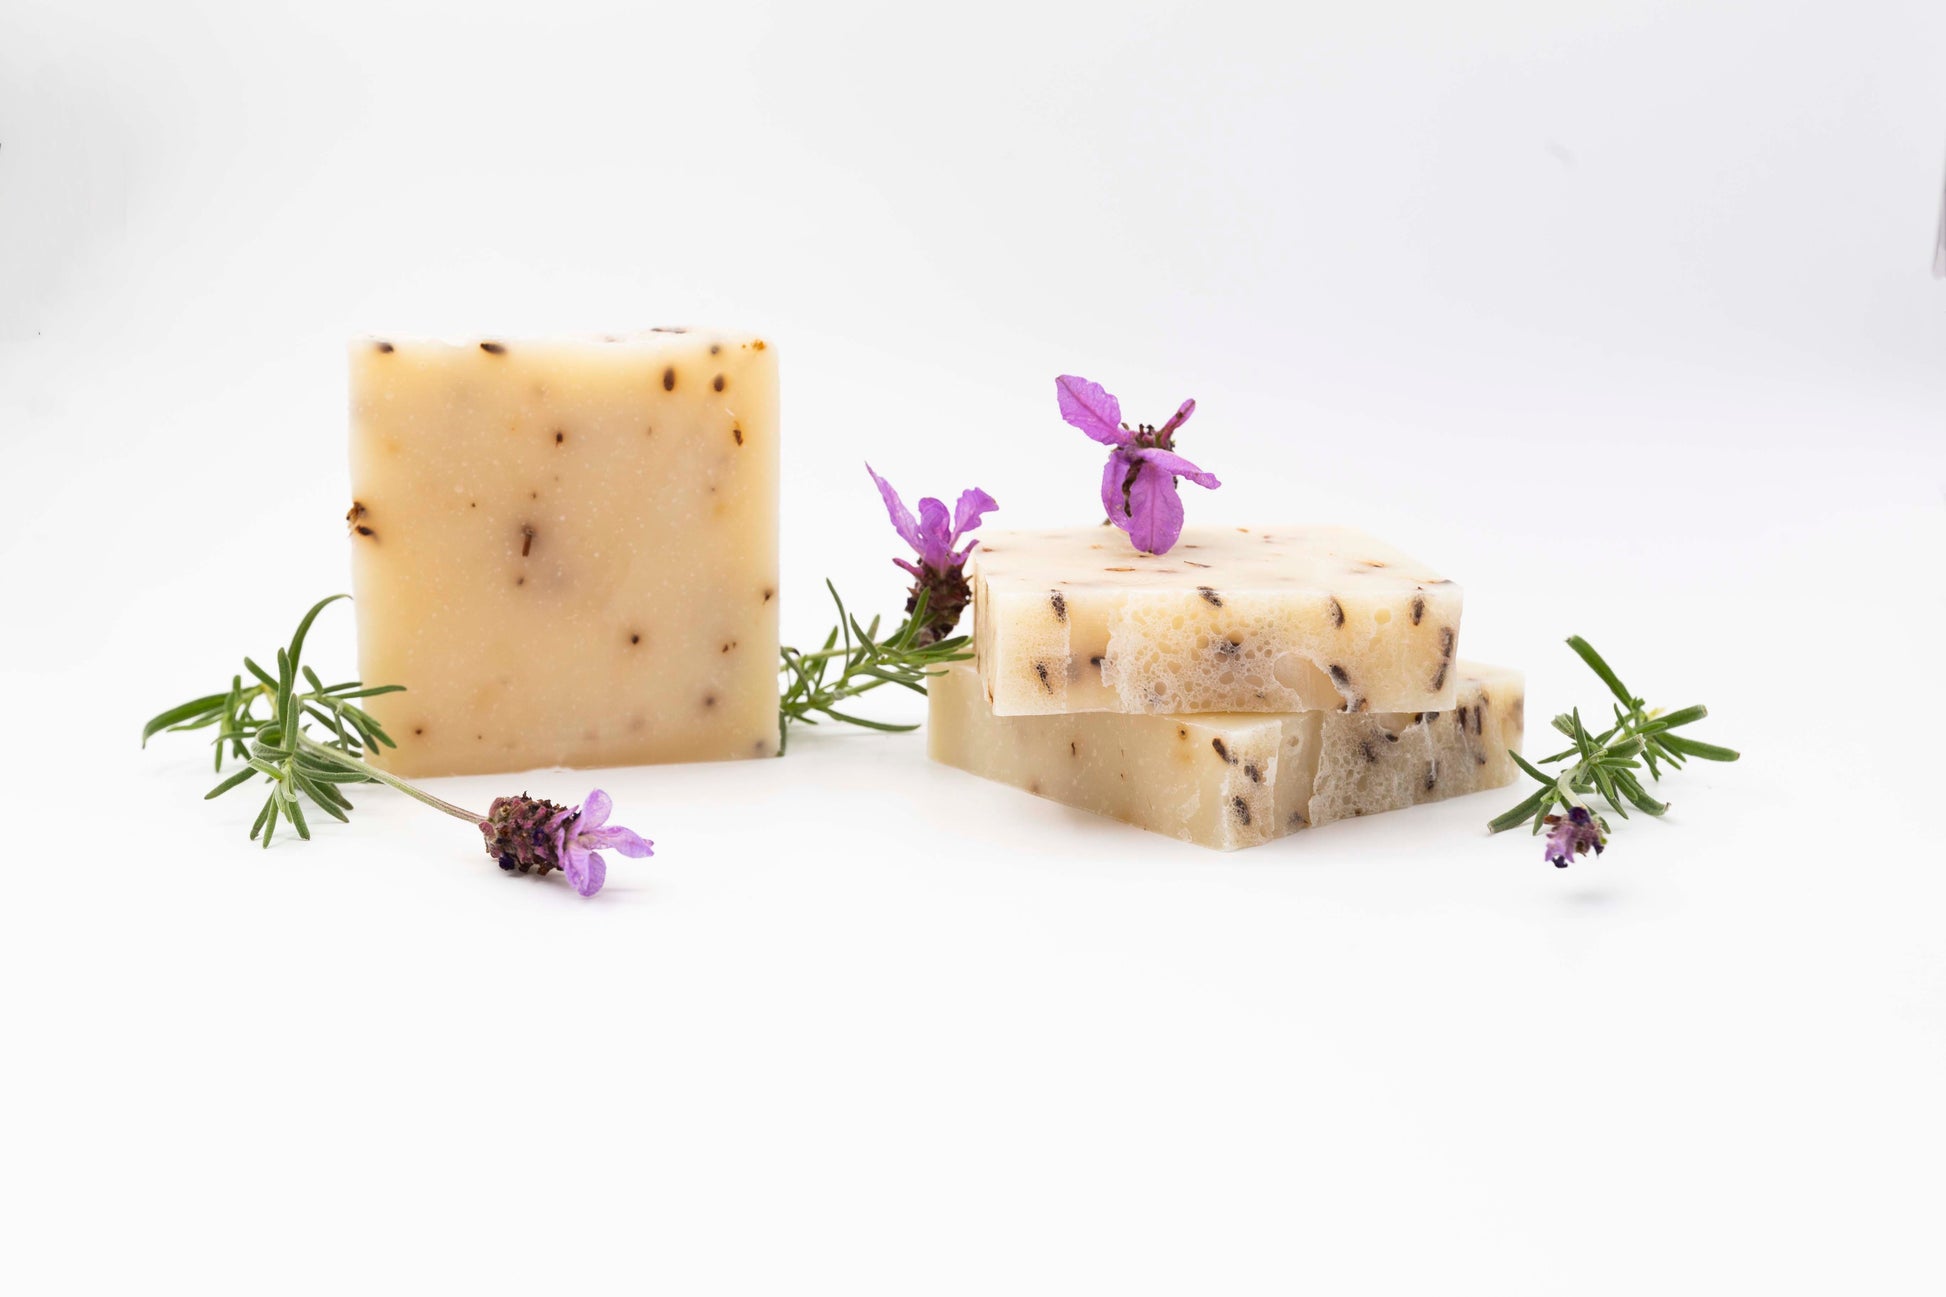 Ivory colored Lavender Blossom soaps flecked with pale purple lavender flowers sit on a clean white background with vibrant purple fresh lavender springs around them